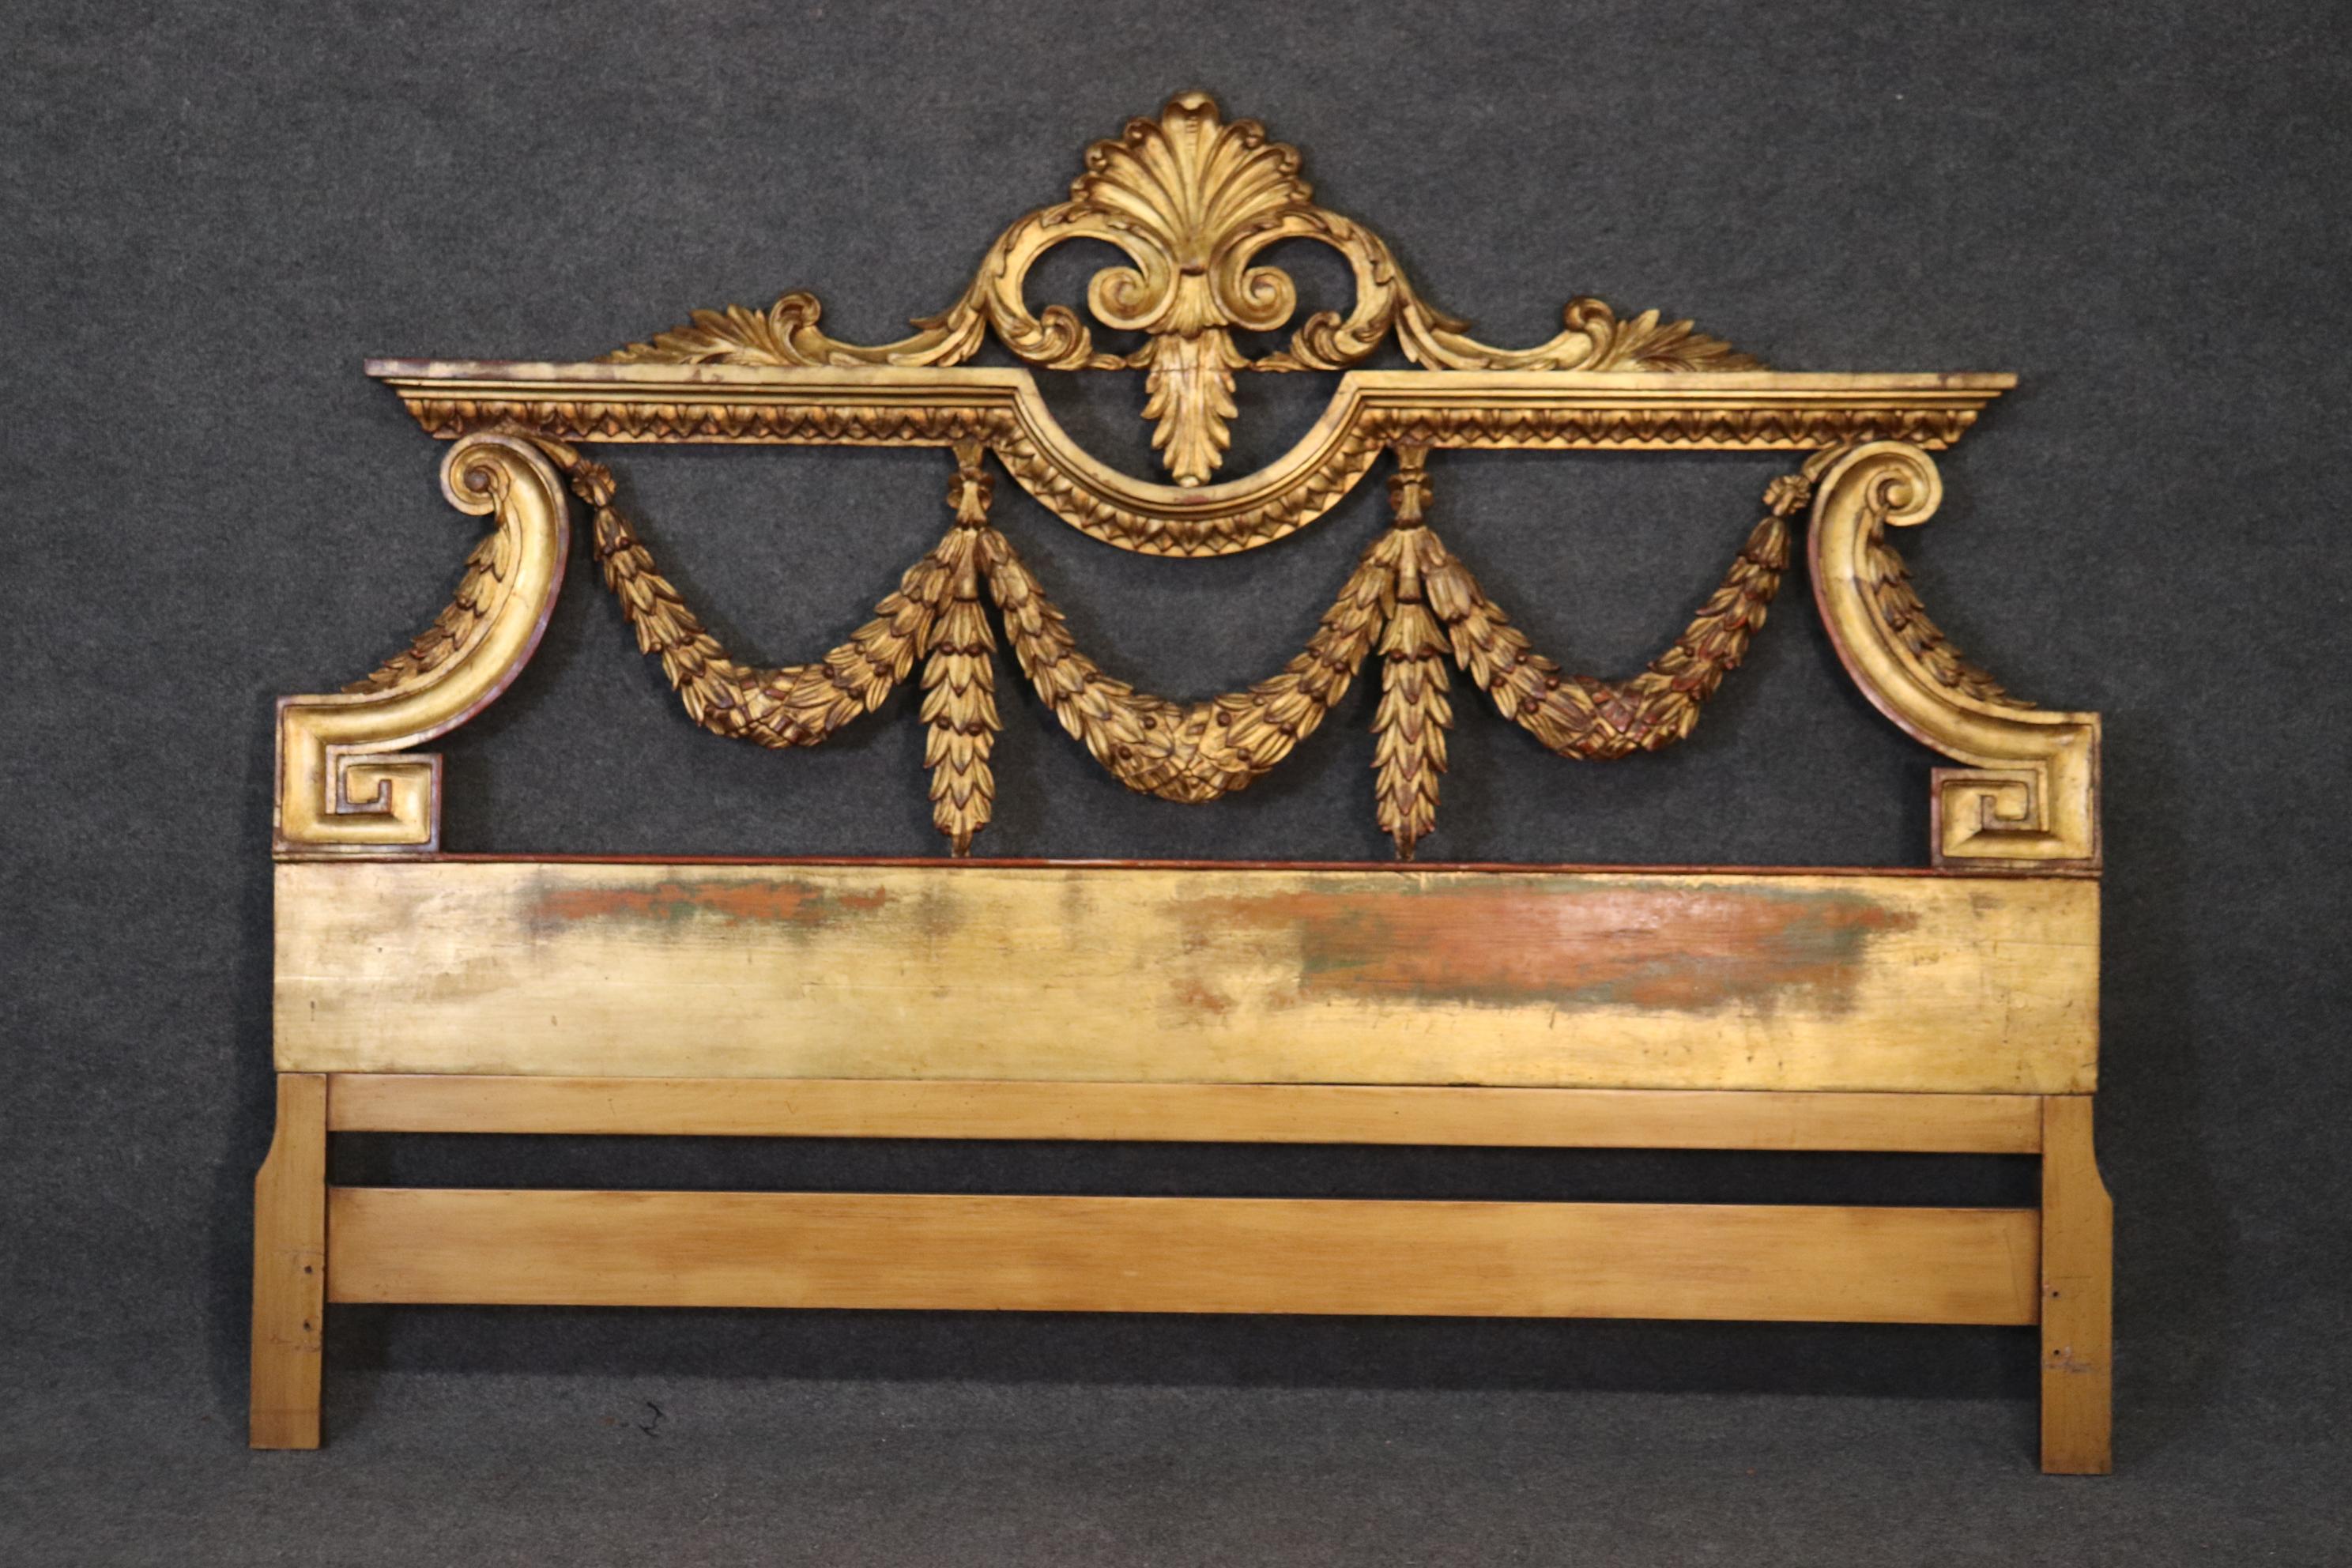 This is a gorgeous genuine gold leafed carved walnut headboard. The finish is in good vintage condition and has a wonderful patina. The beds dates to the 1950s era and can easily work with Hollywood Regency and other styles. Measures 80 inches wide